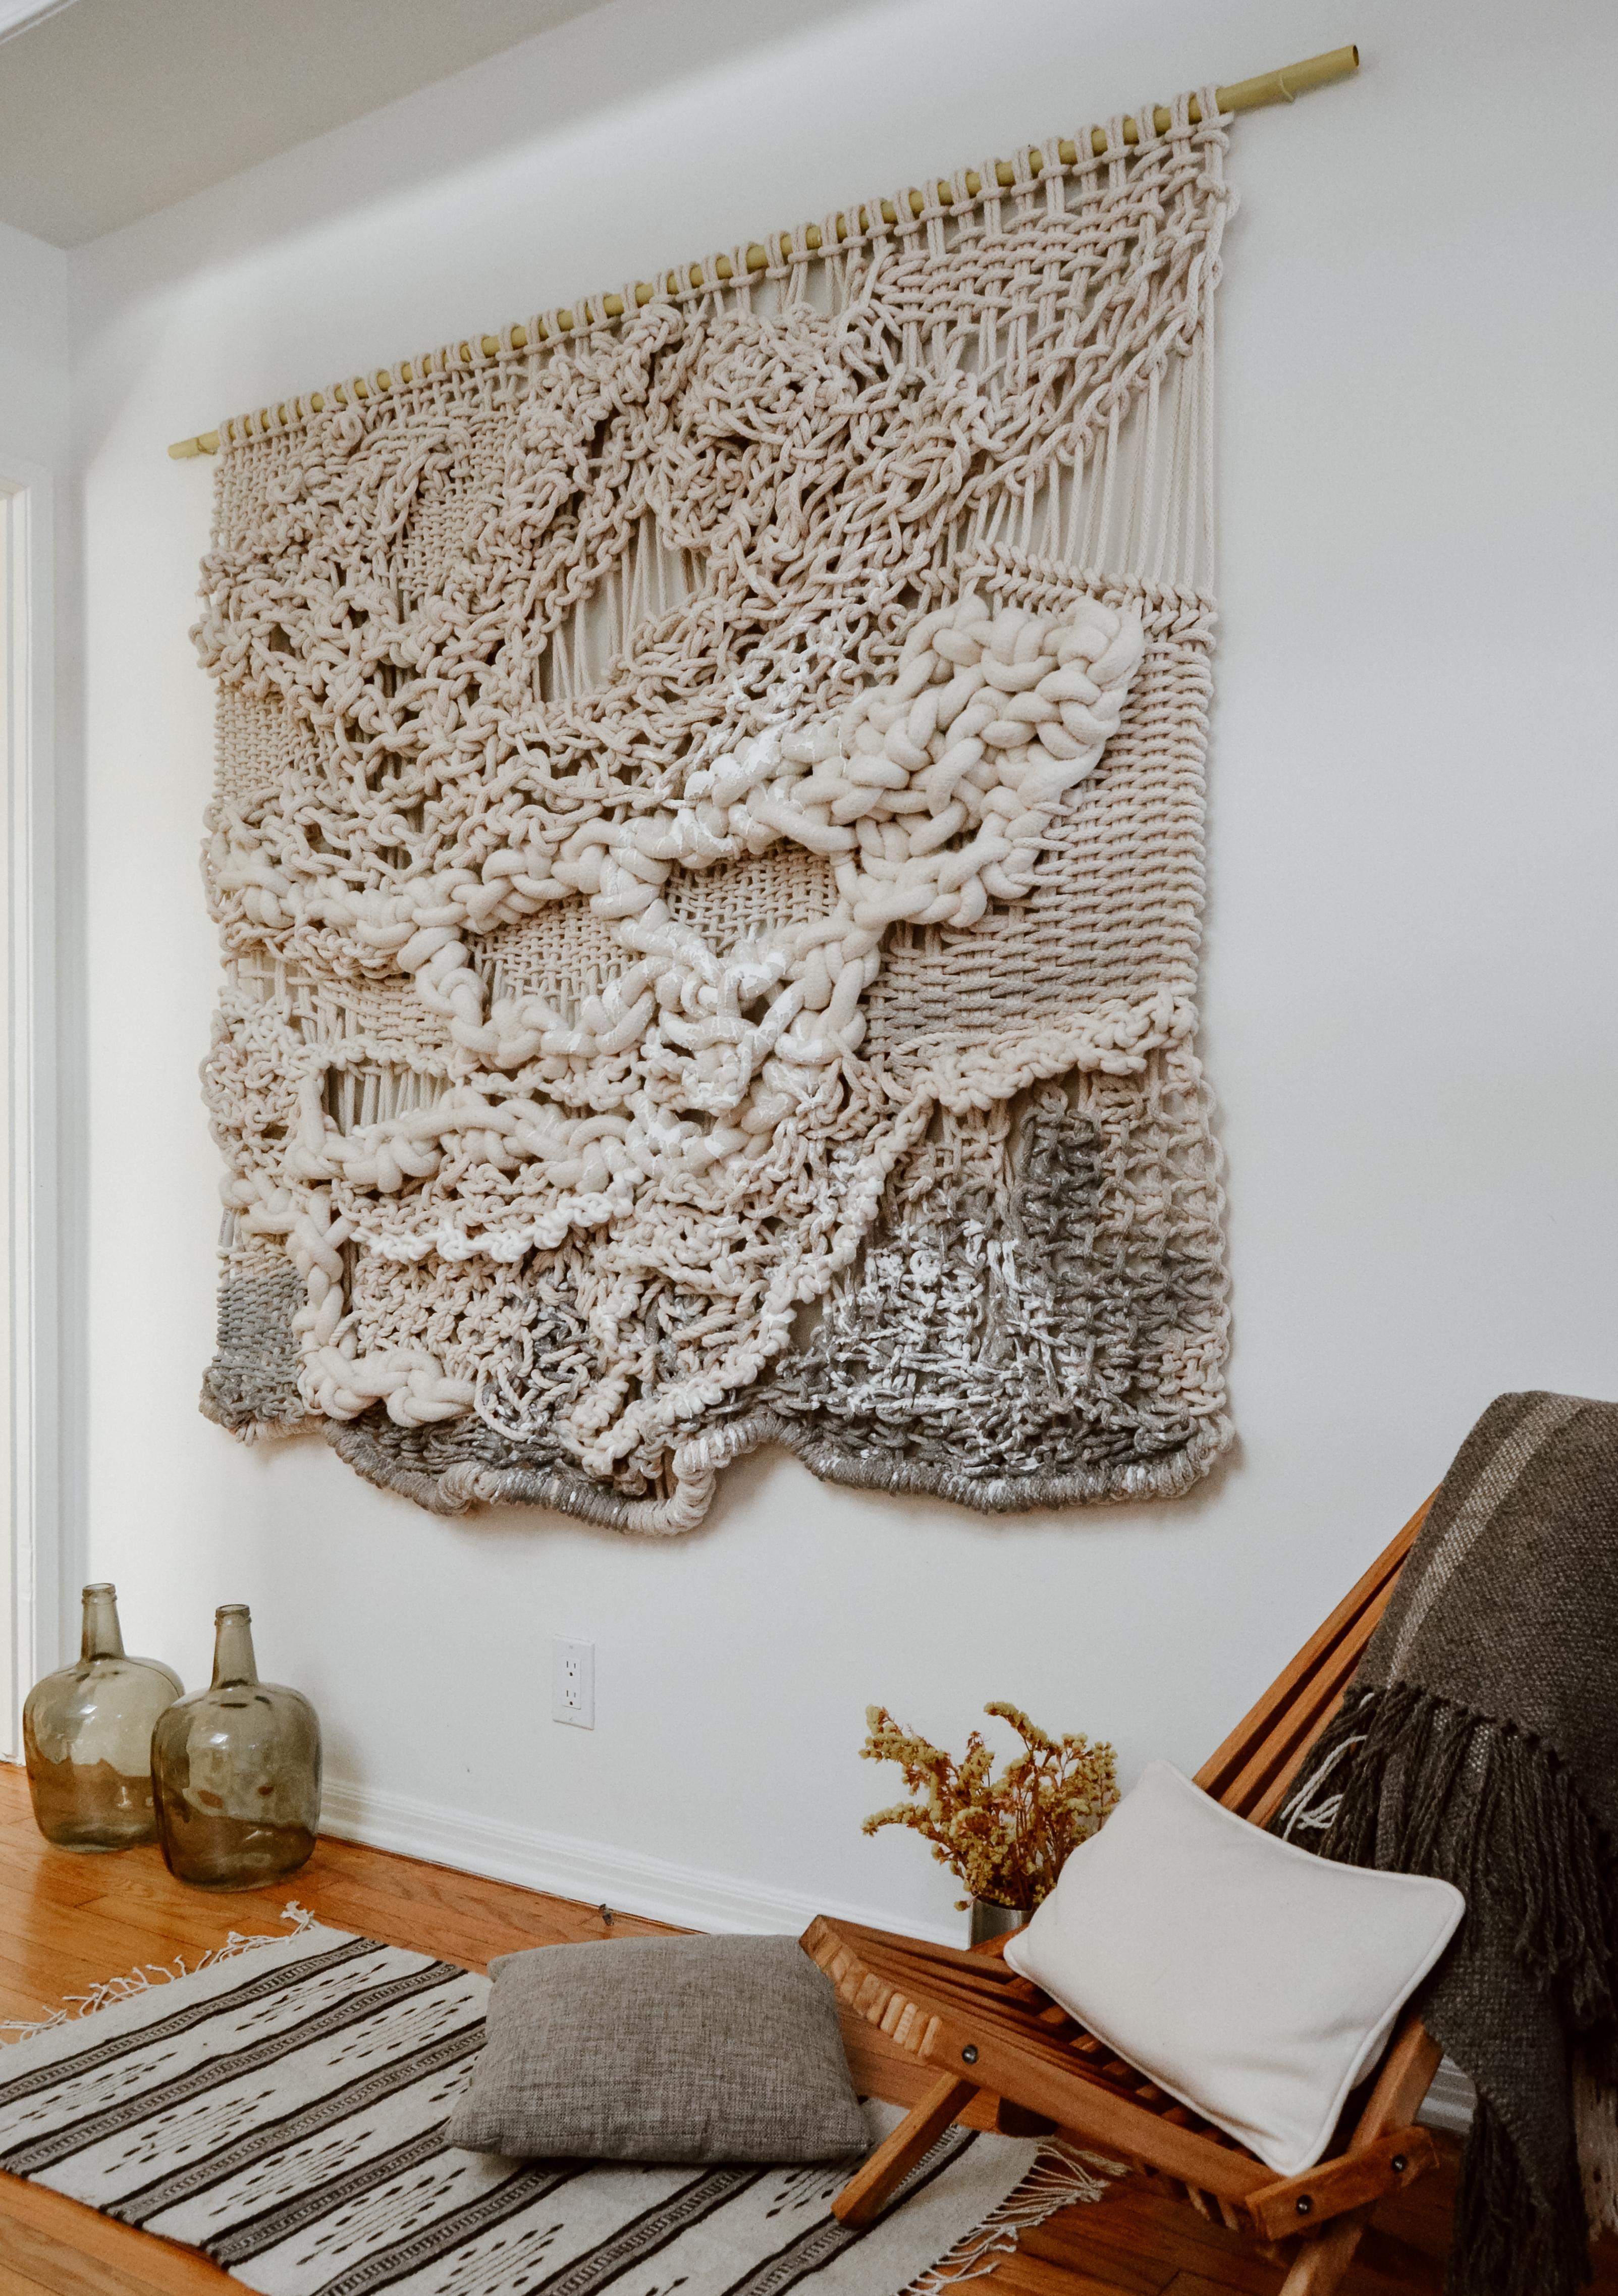 Extreme Macrame Wall Art made combining different traditional textiles like weaving and macrame.
This Fiber Art will be the absolute protagonist of any space adding texture and volume to walls.
An unique tapestry delicately hand knotted with